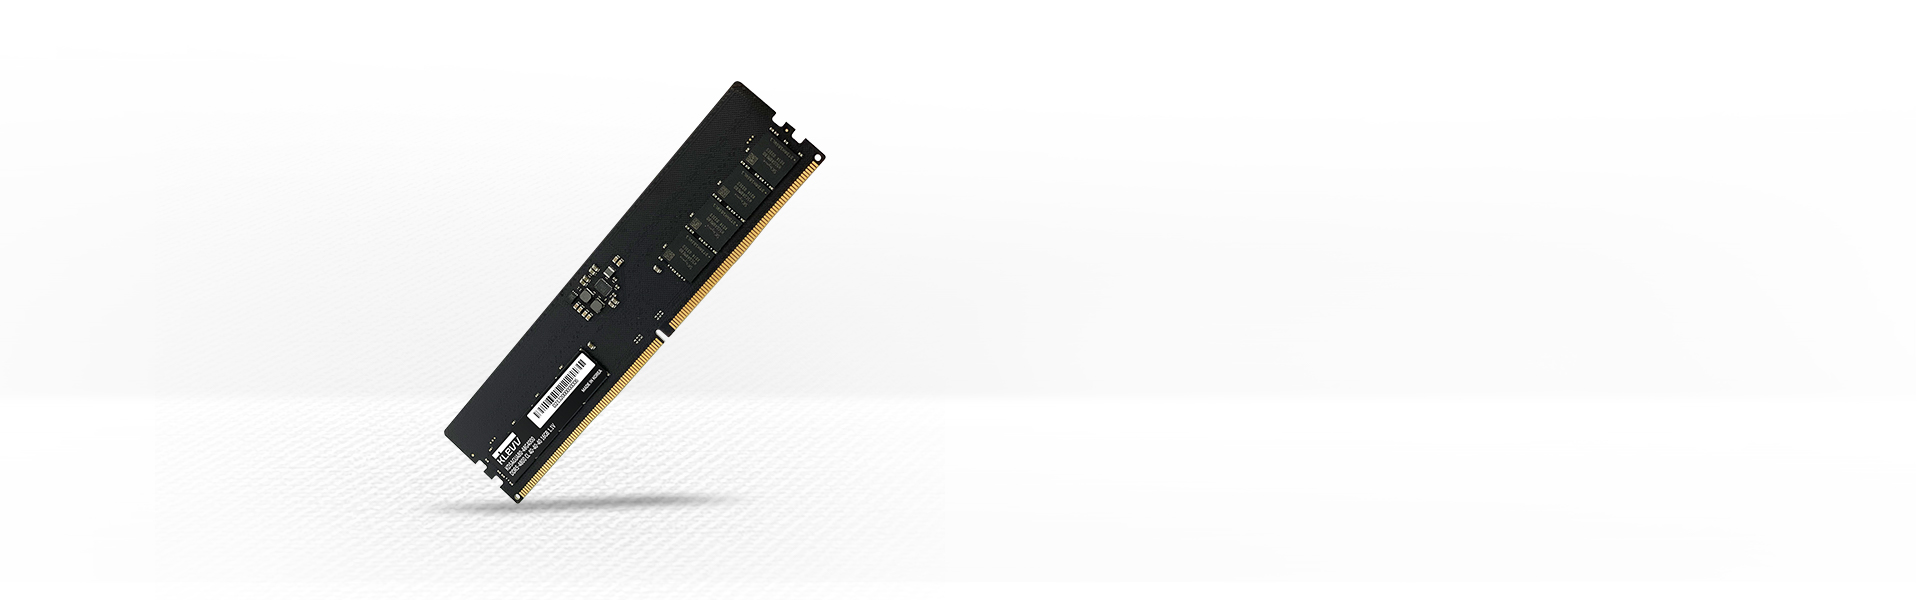 Lower Voltage, Highly Improved Performance Built-in PMIC